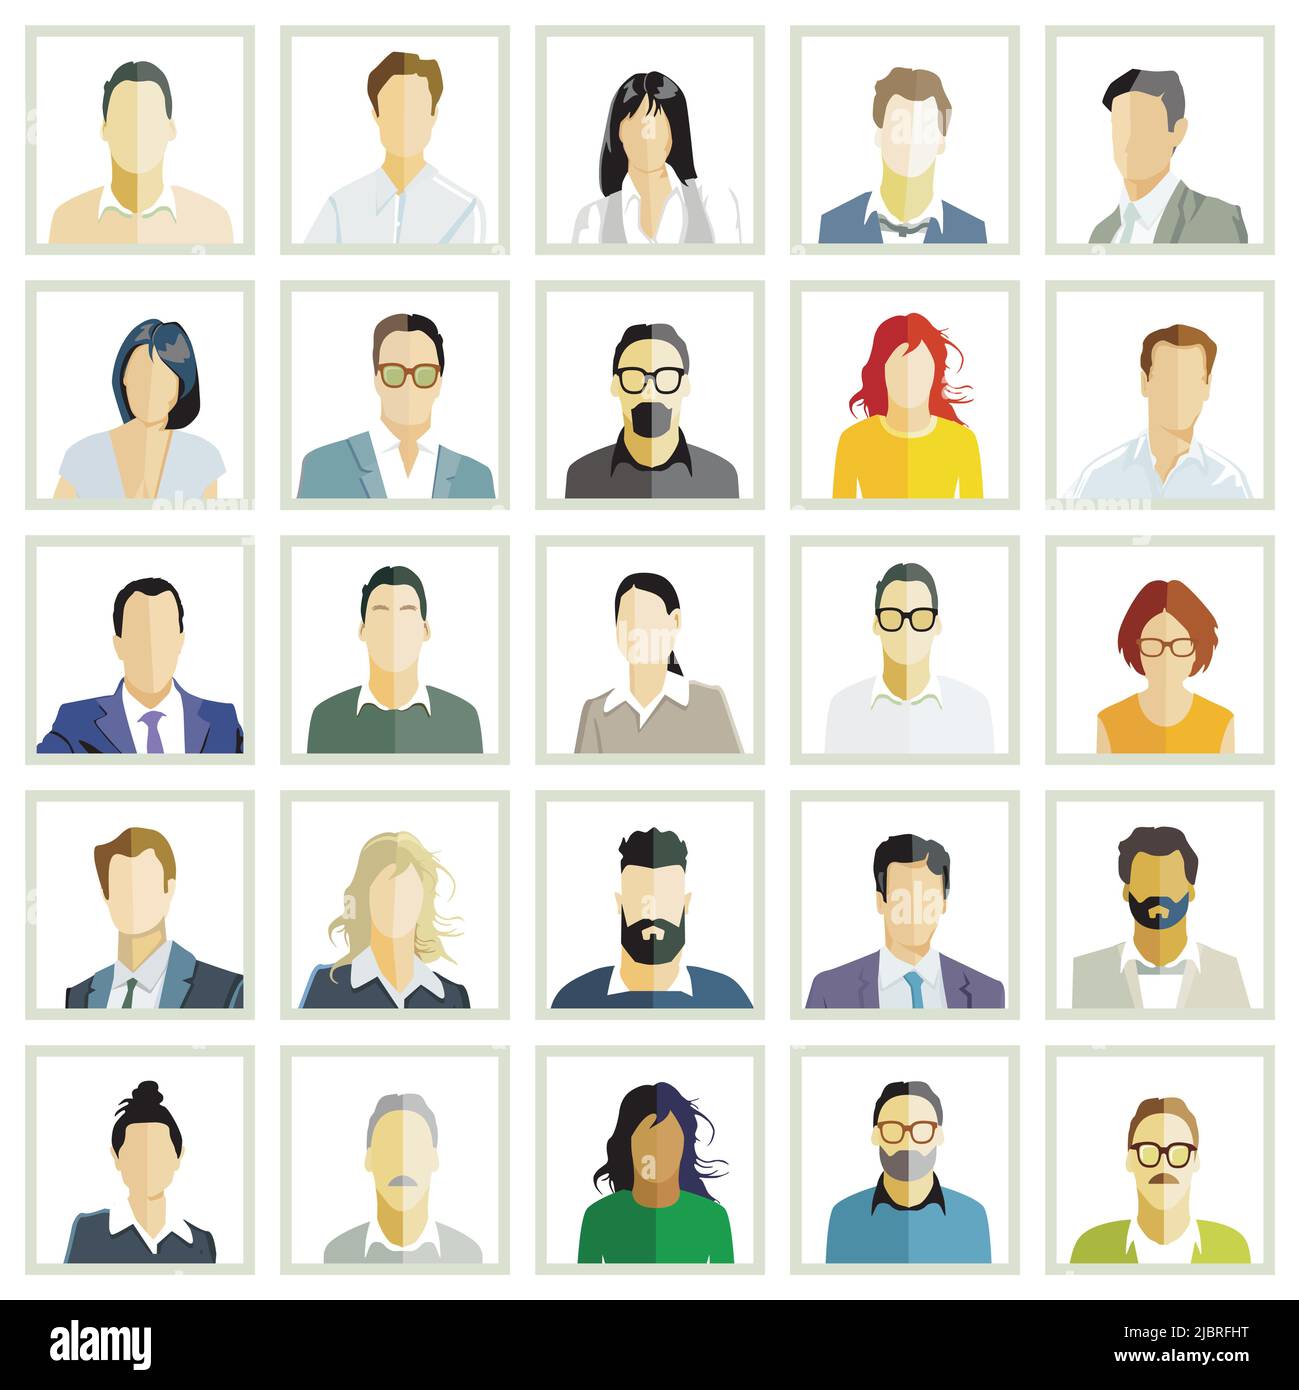 Group of people portrait, faces isolated on white background. illustration Stock Vector